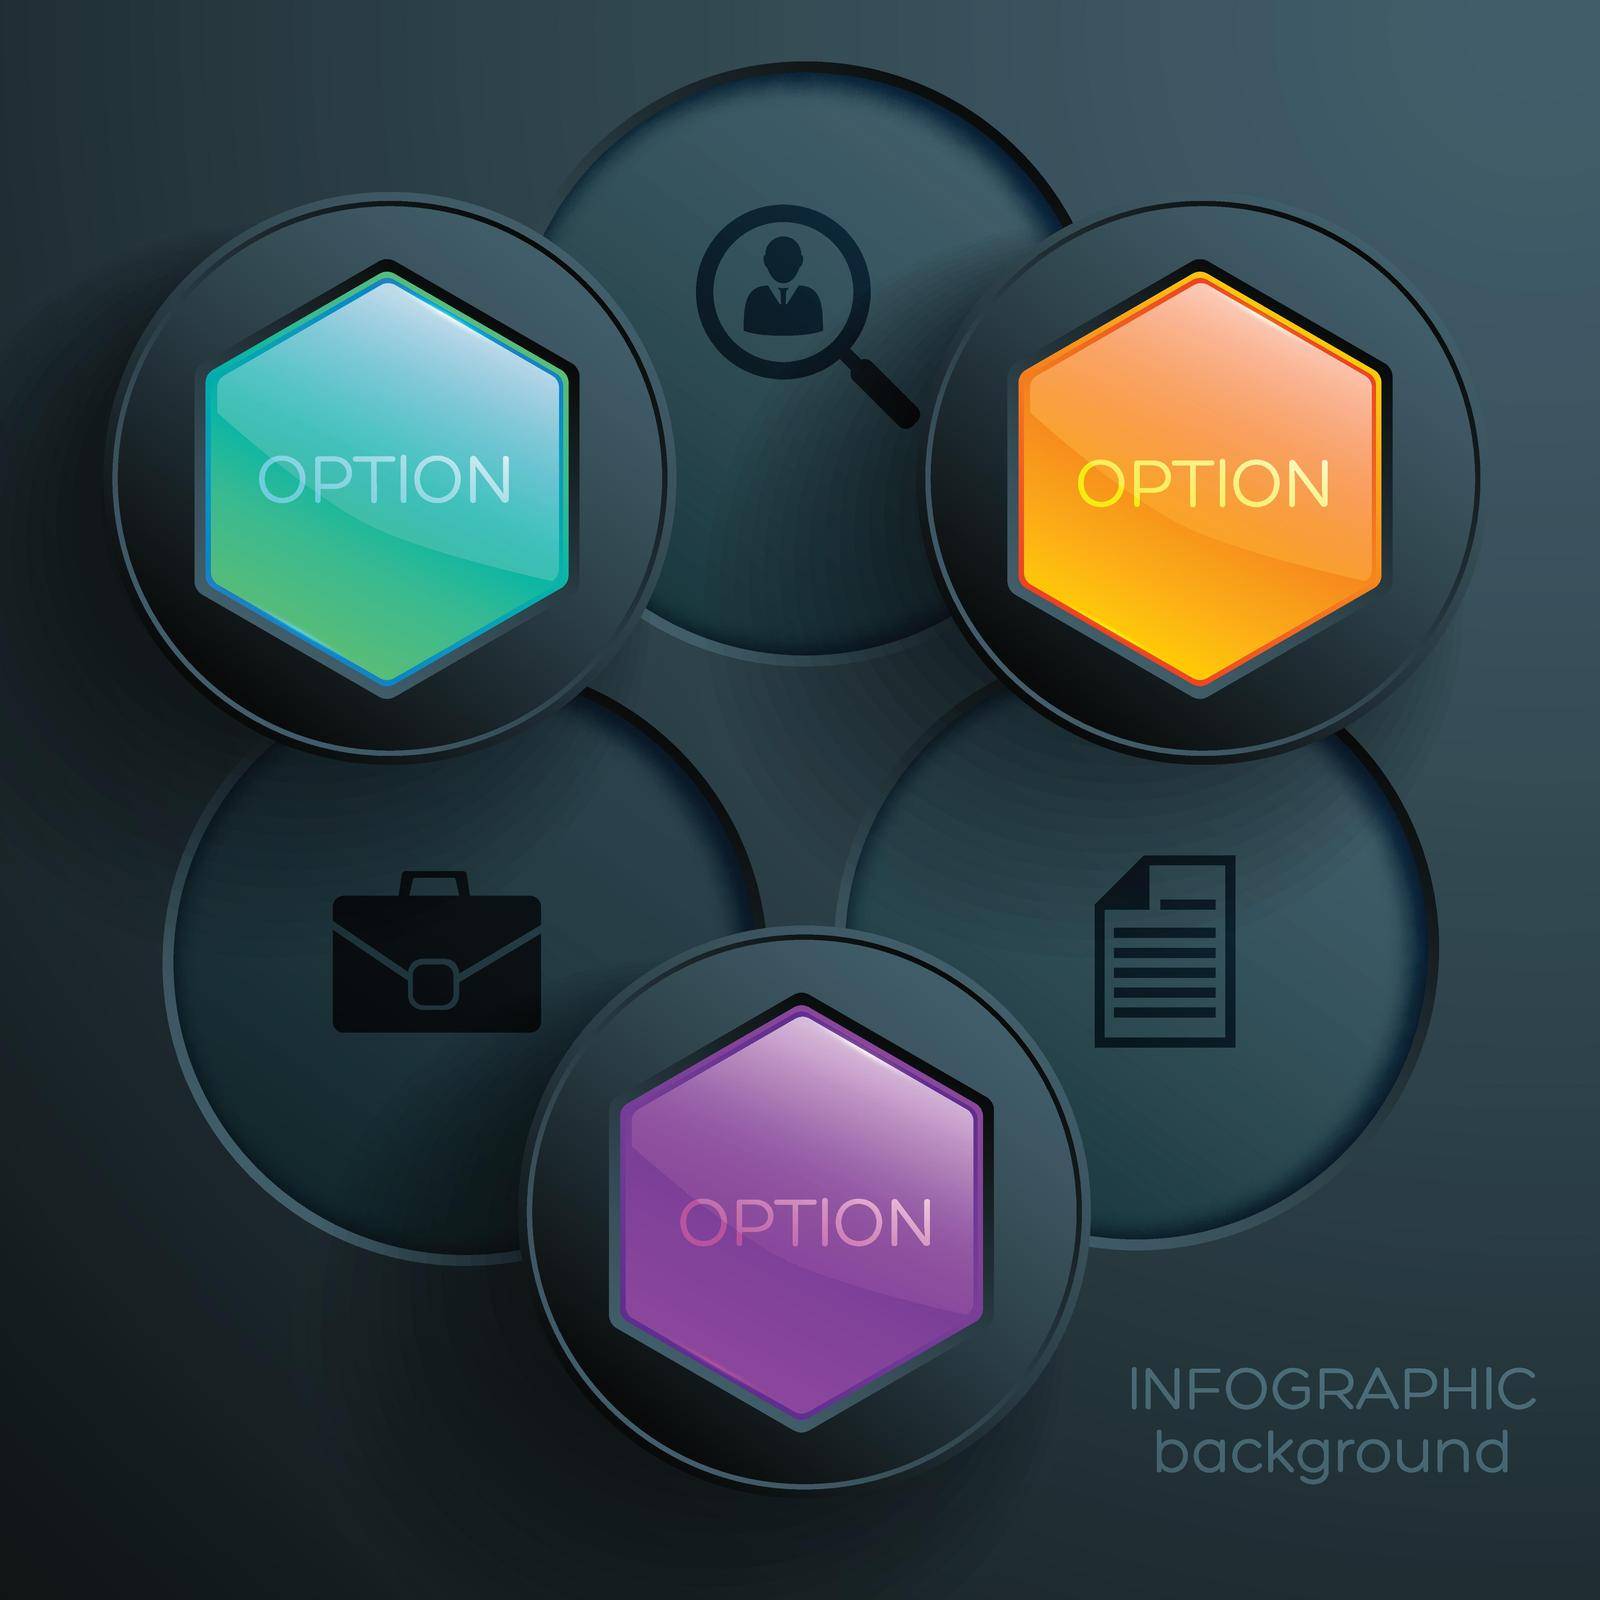 Business web infographic concept with icons colorful glossy hexagons and round buttons on dark background vector illustration